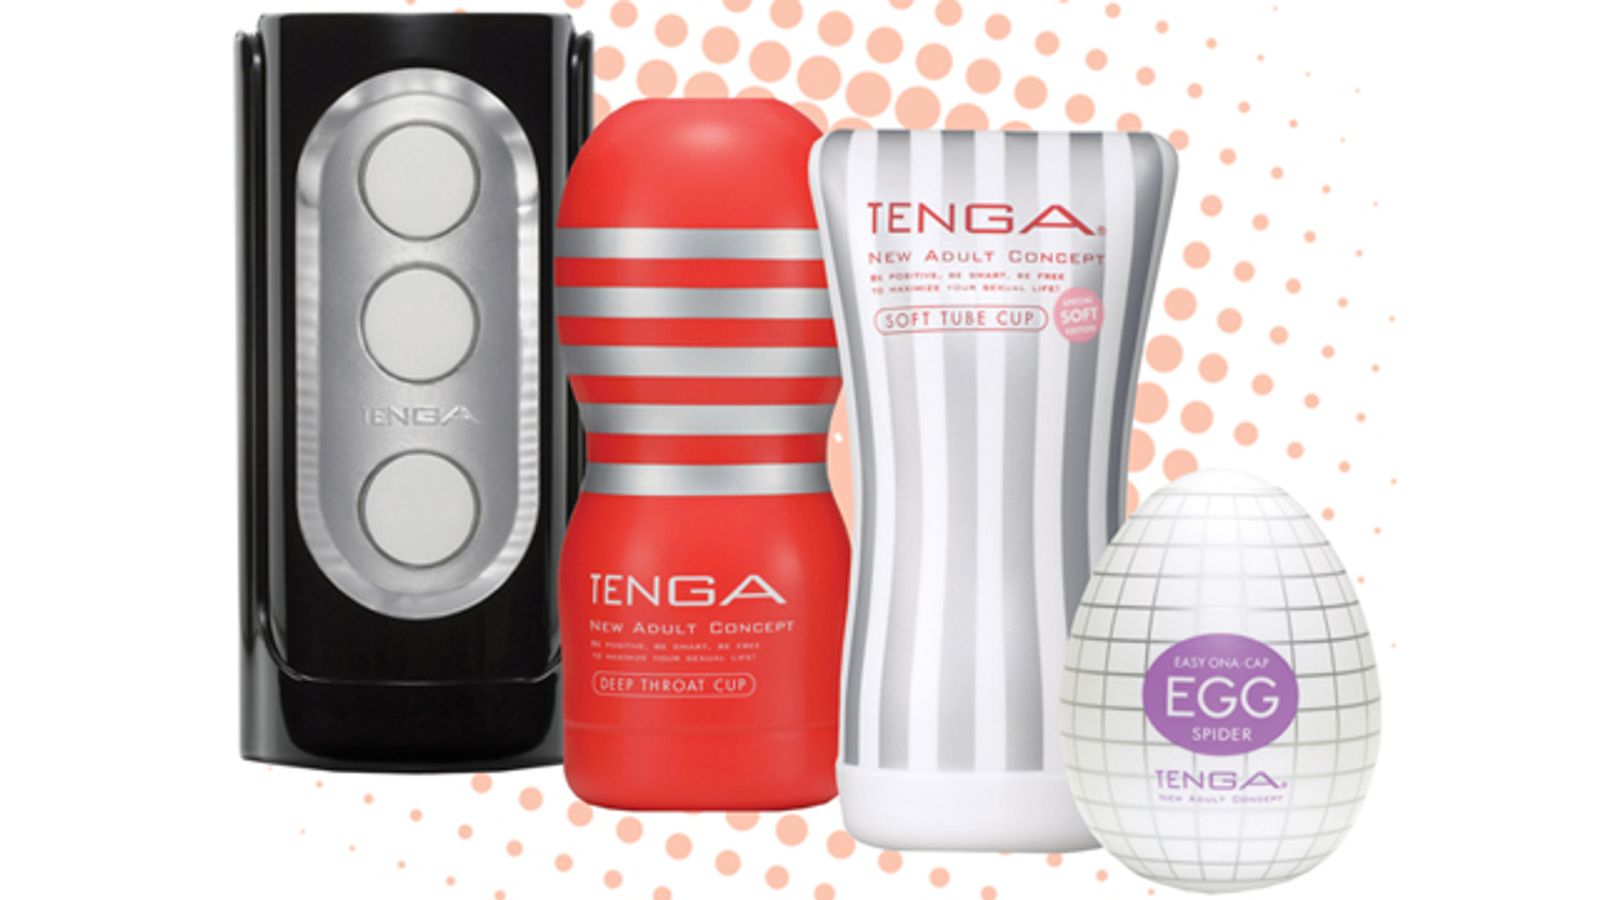 Liberator Signs Deal With Spencer Gifts To Sell Tenga Products